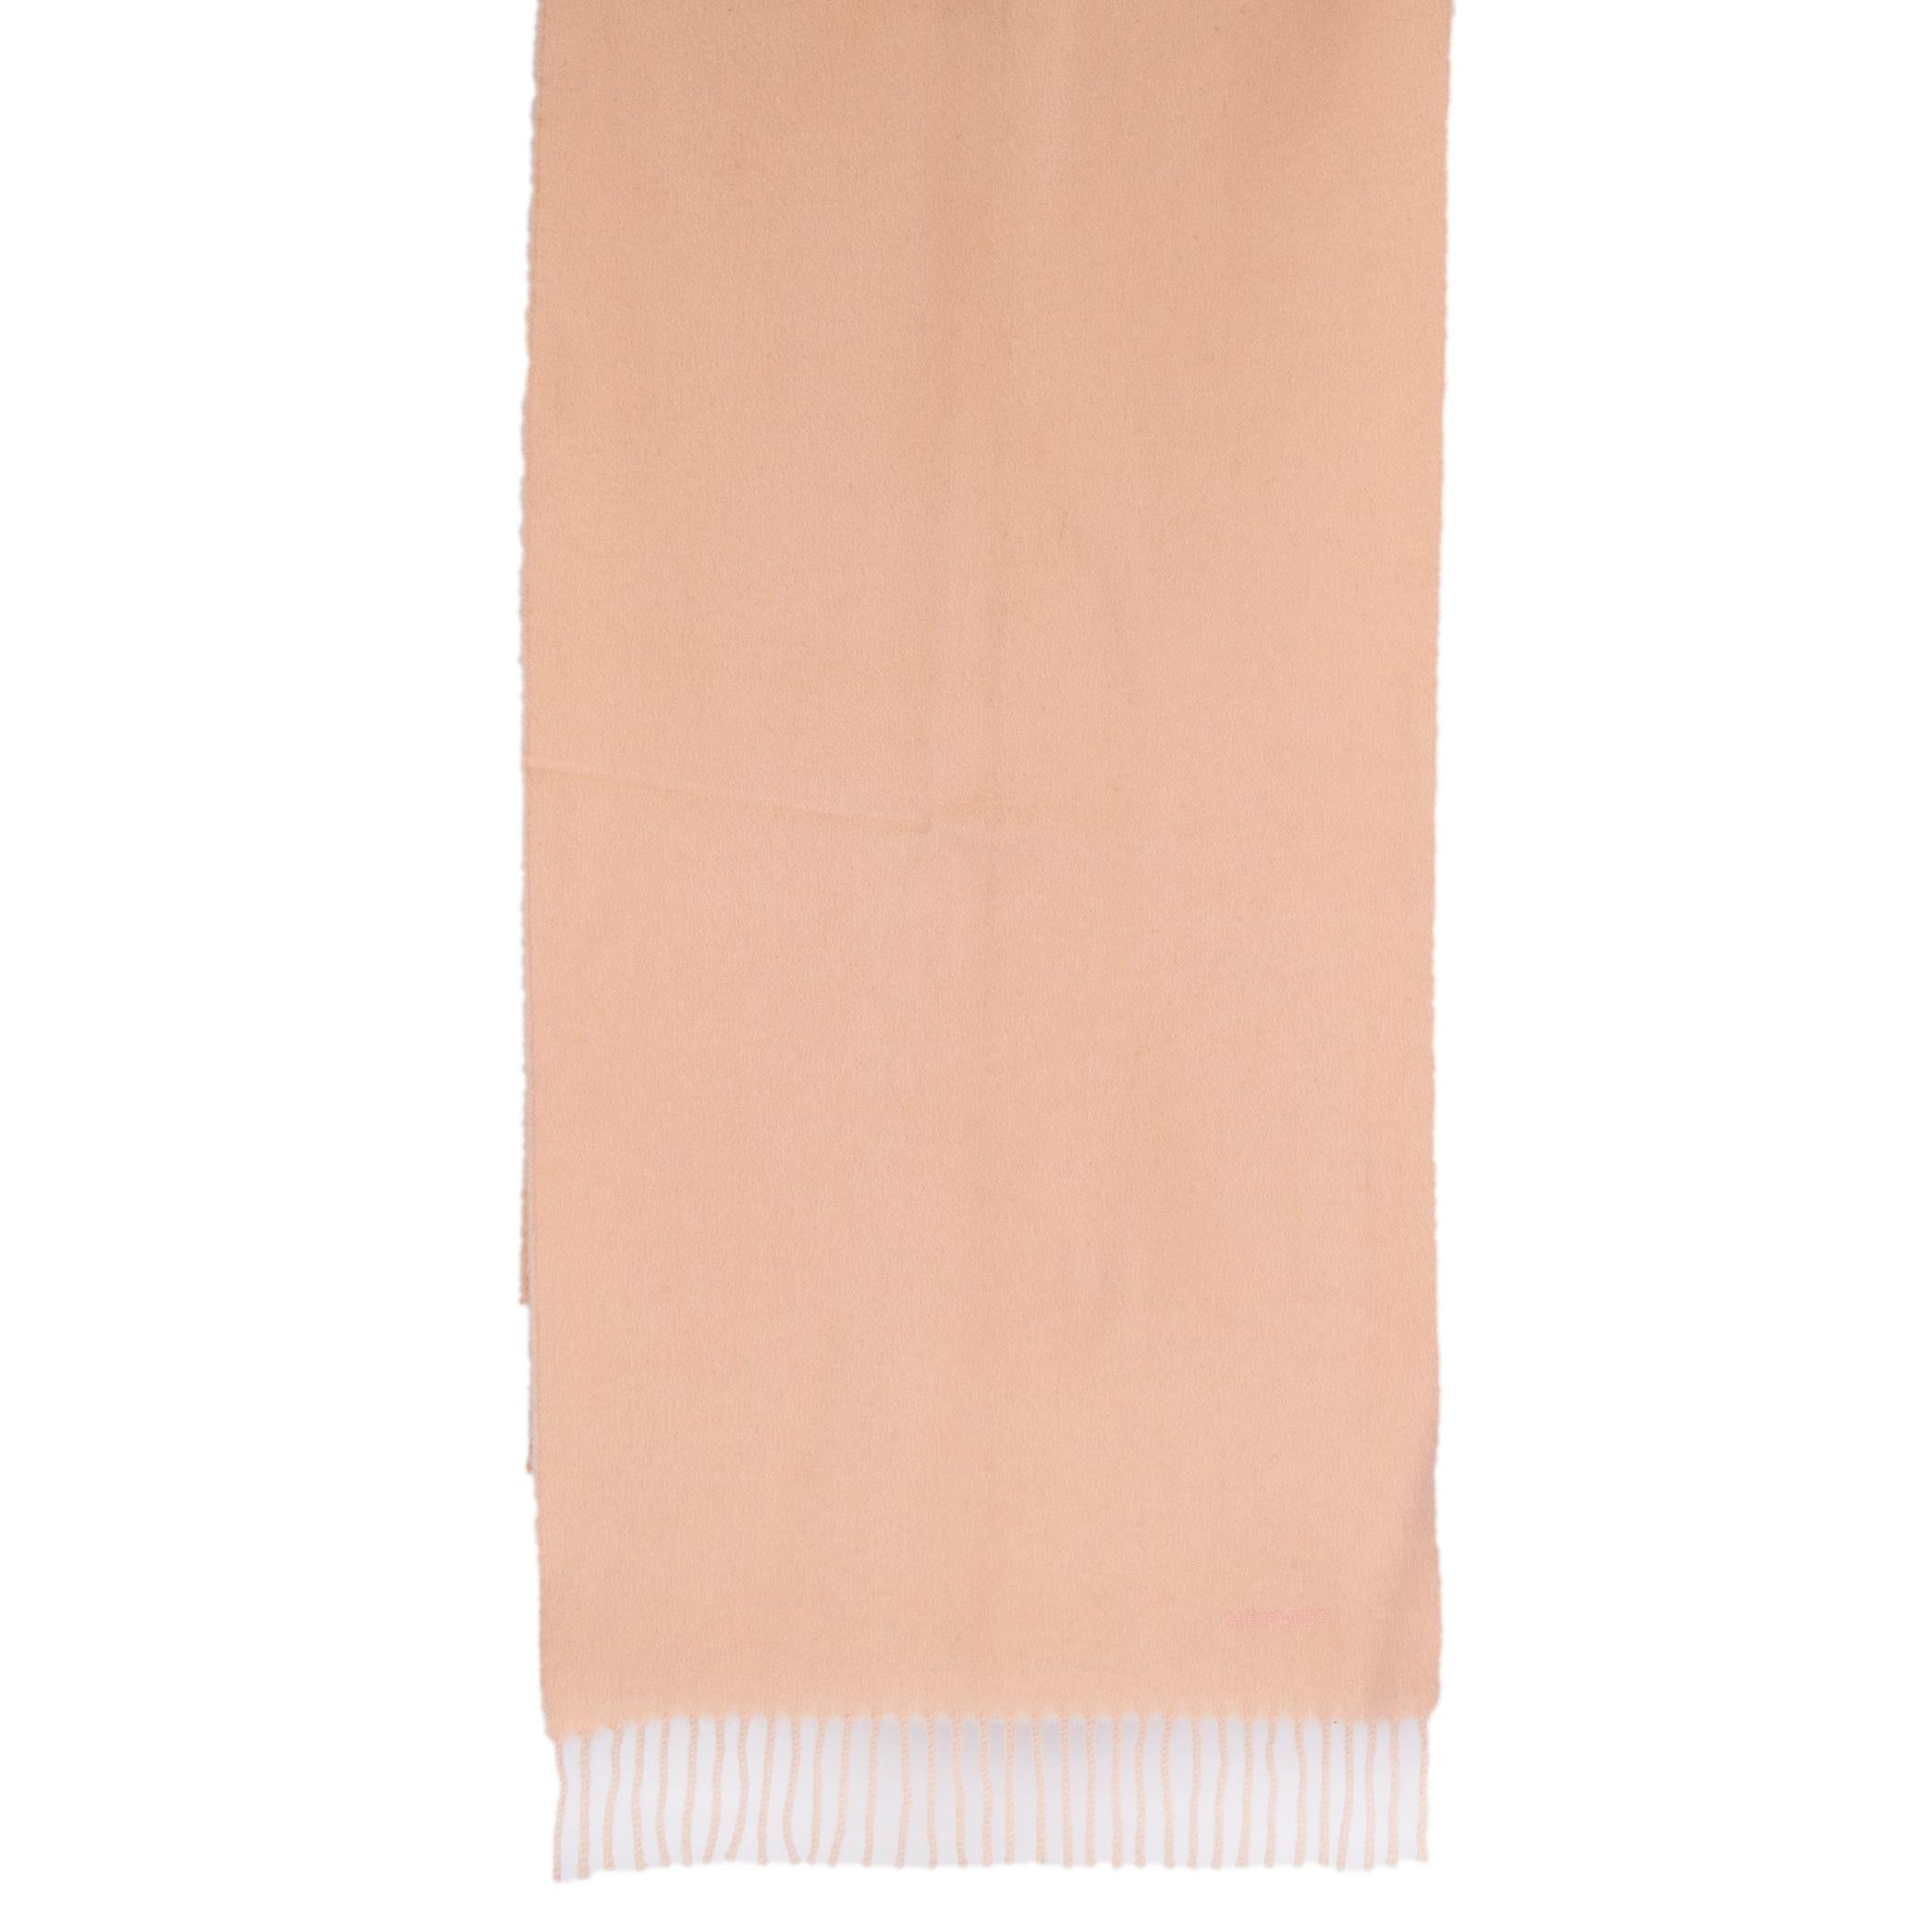 Hermès fringed Etole Unie Brodee muffler in peach cashmere (100%). Has been worn and is in excellent condition. 

Width 39cm (15.2in)
Length 150cm (58.5in)
